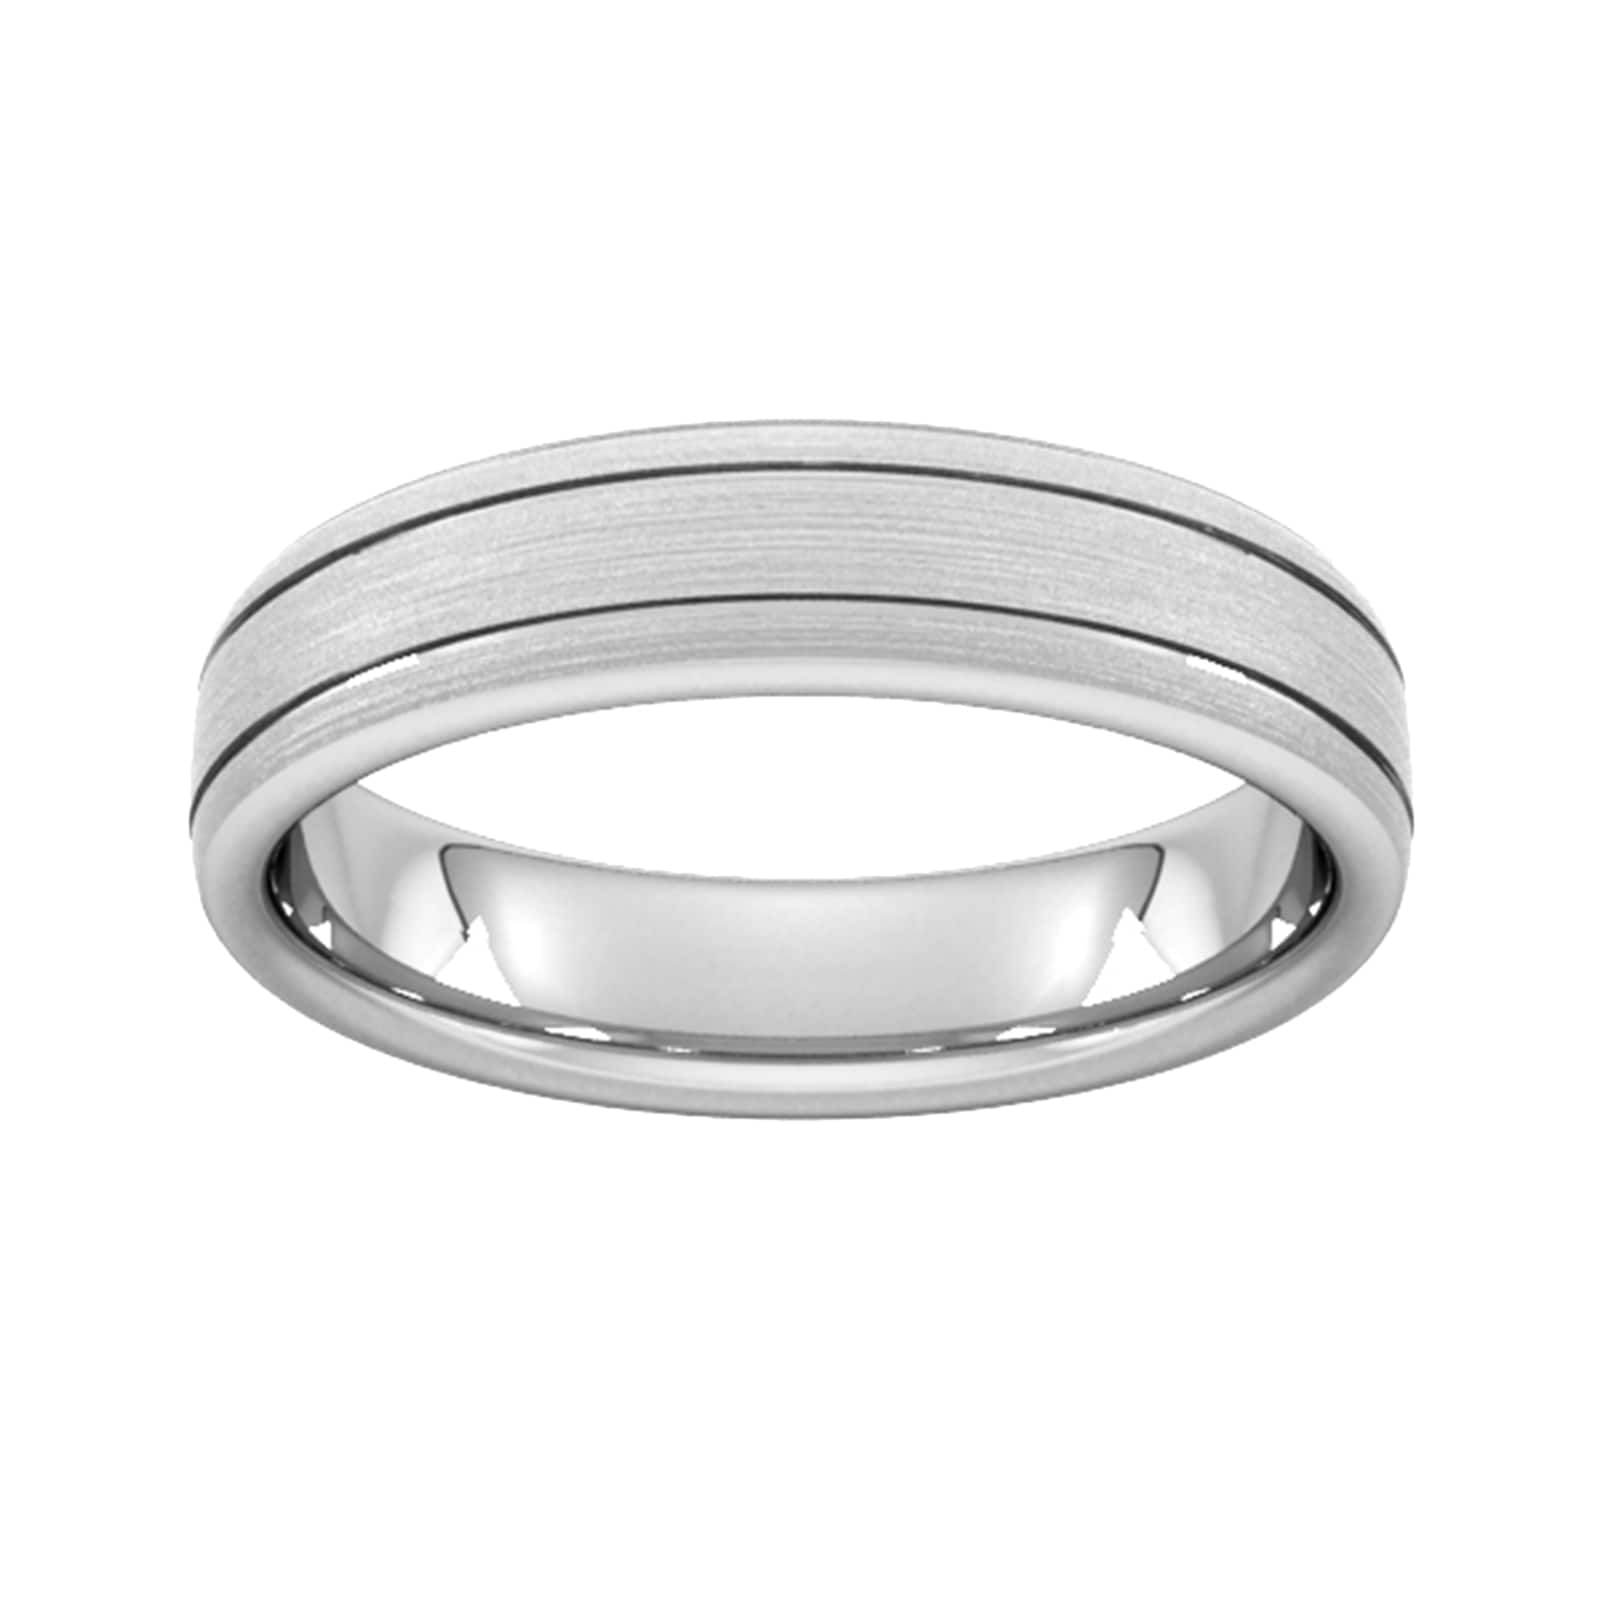 5mm D Shape Heavy Matt Finish With Double Grooves Wedding Ring In 9 Carat White Gold - Ring Size T